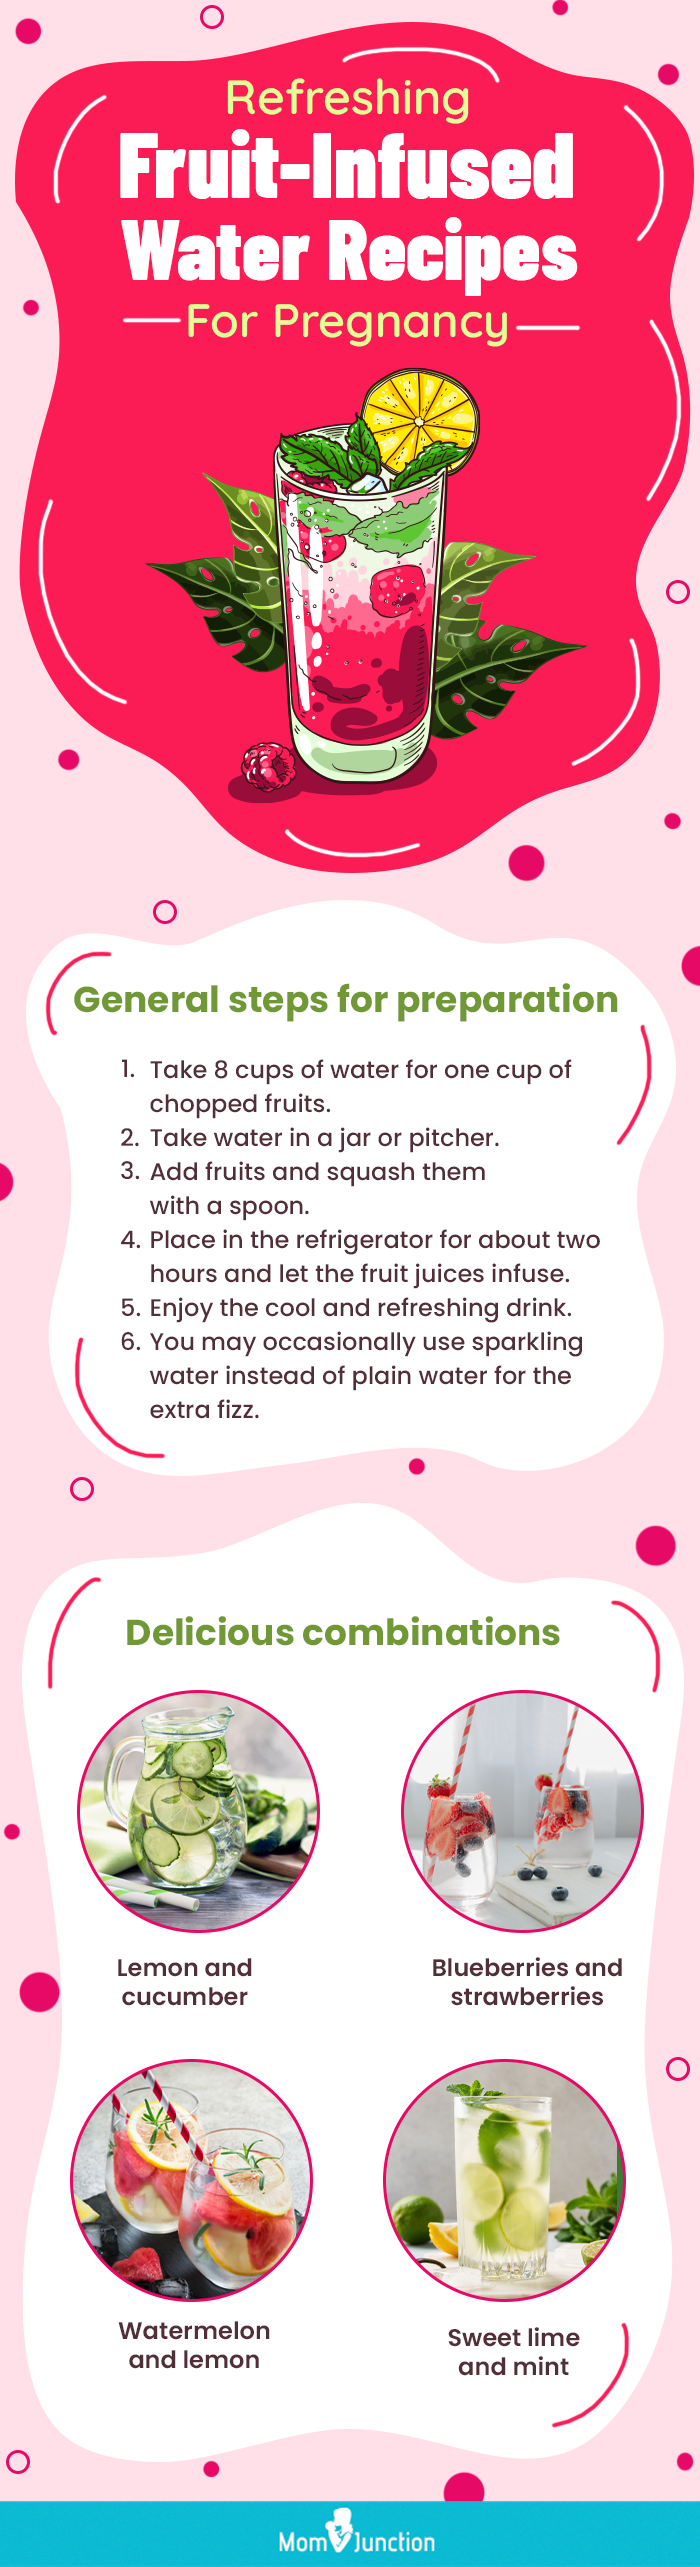 refreshing fruit infused water recipes for pregnancy [infographic]